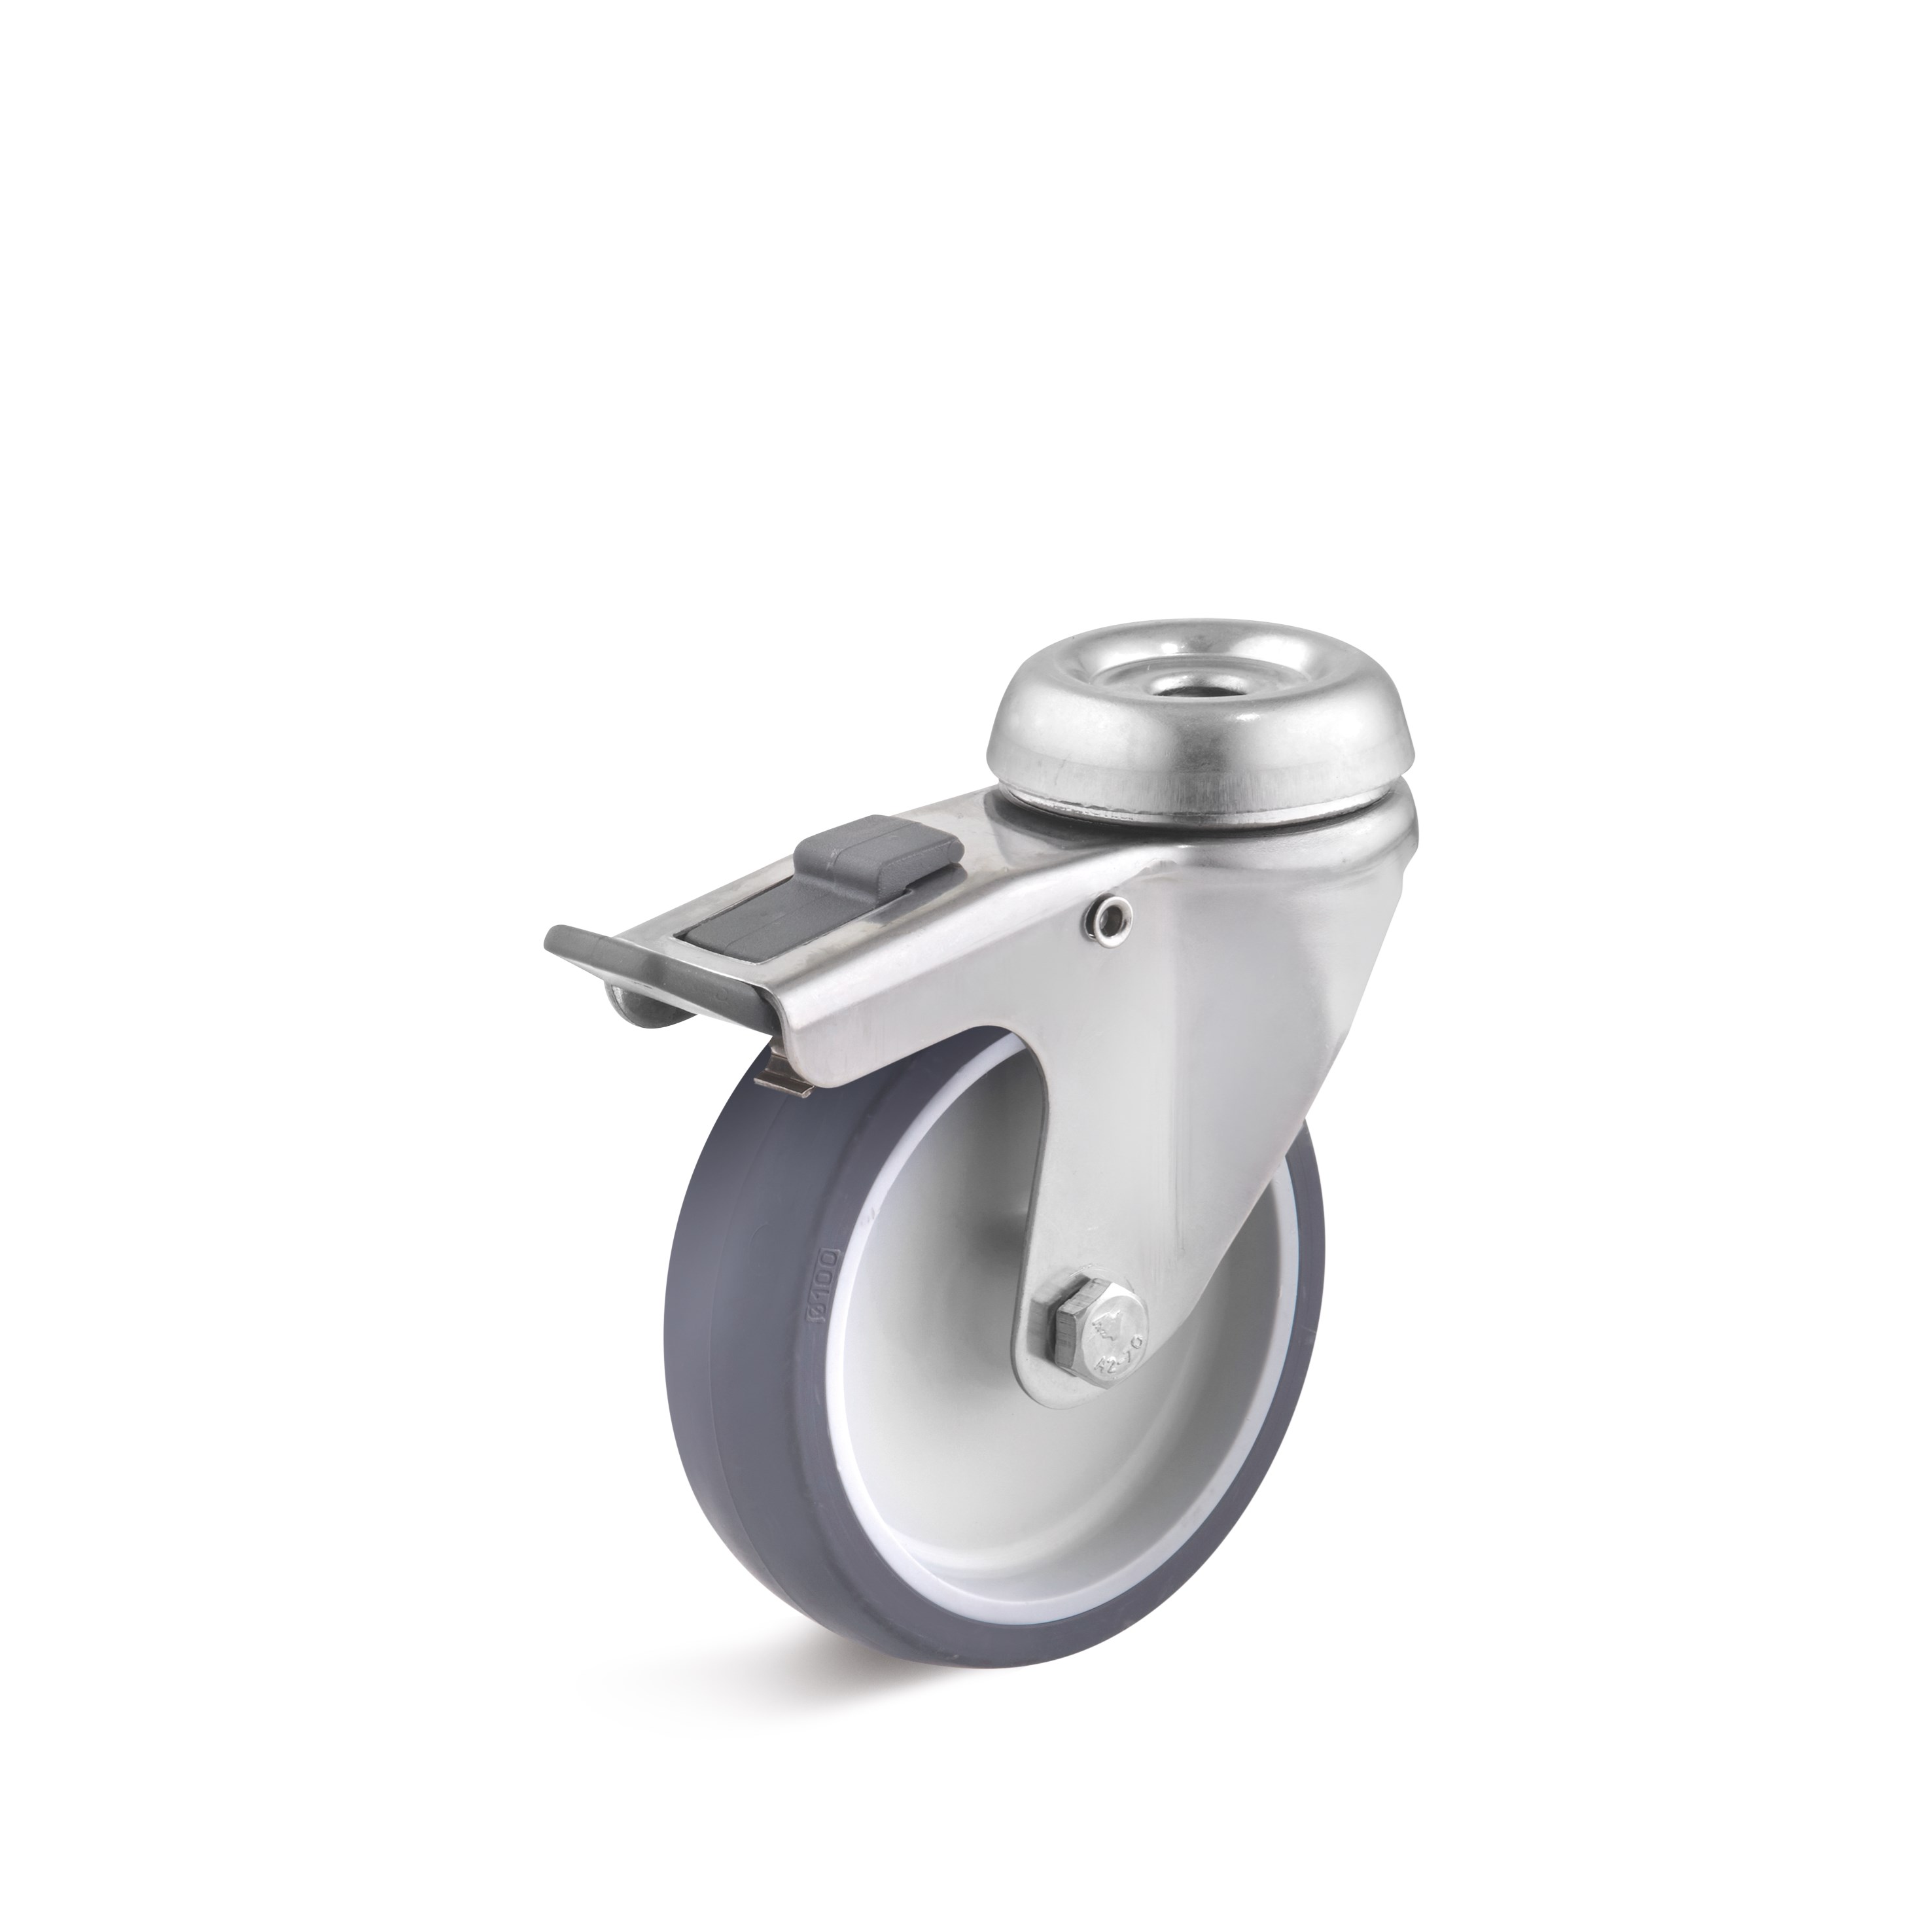 Stainless steel swivel castor with double stop and bolt hole, thermoplastic wheel